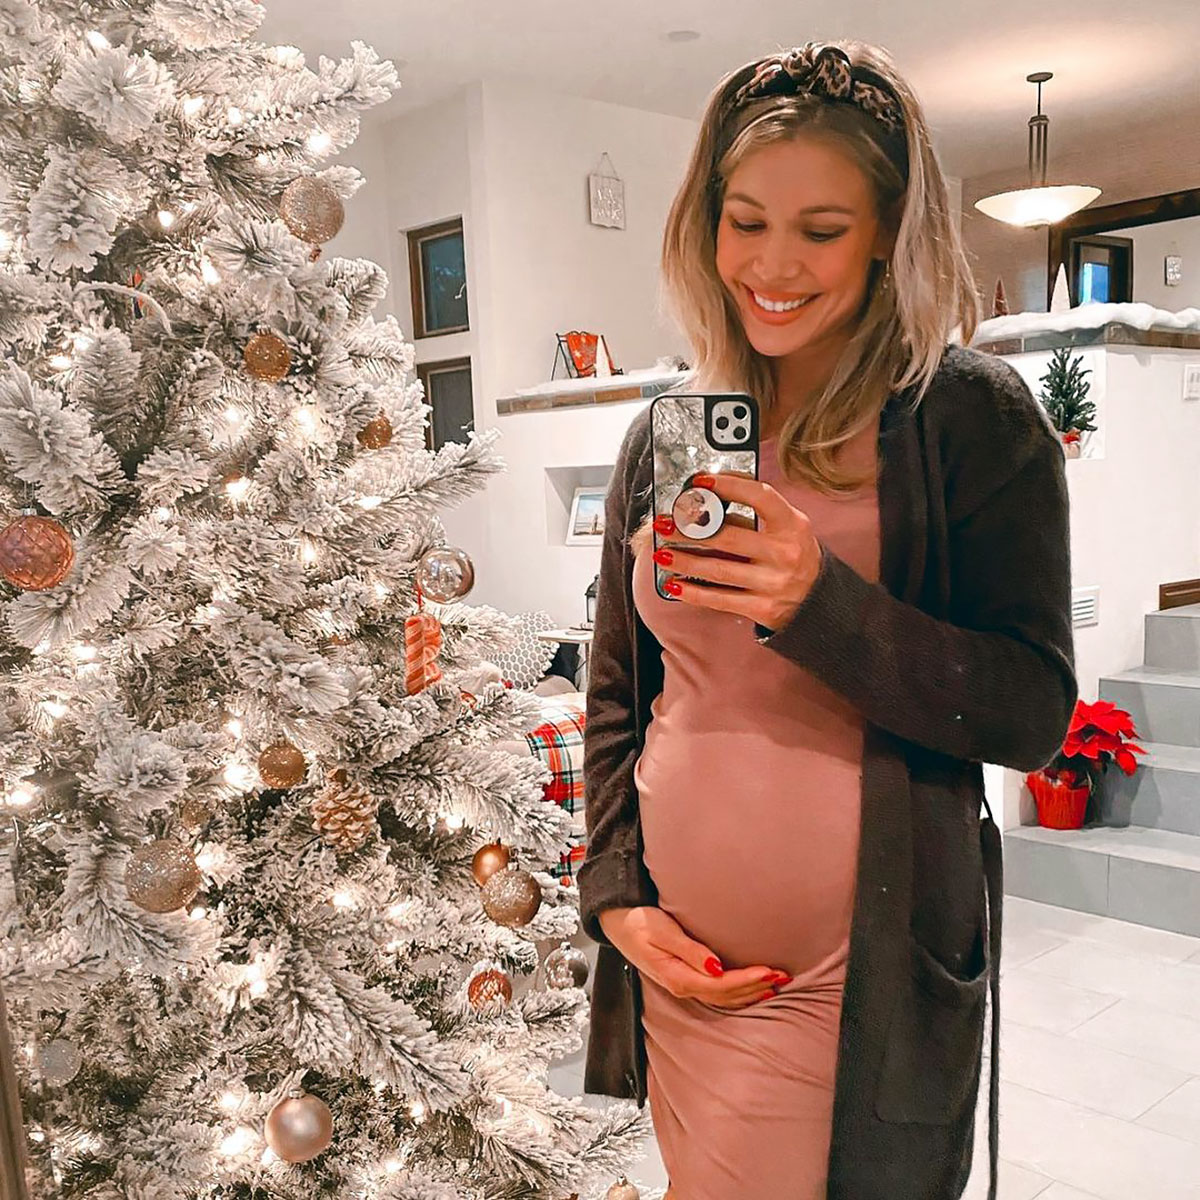 Bachelor in Paradise's Pregnant Krystal Nielson's Baby Bump Pics